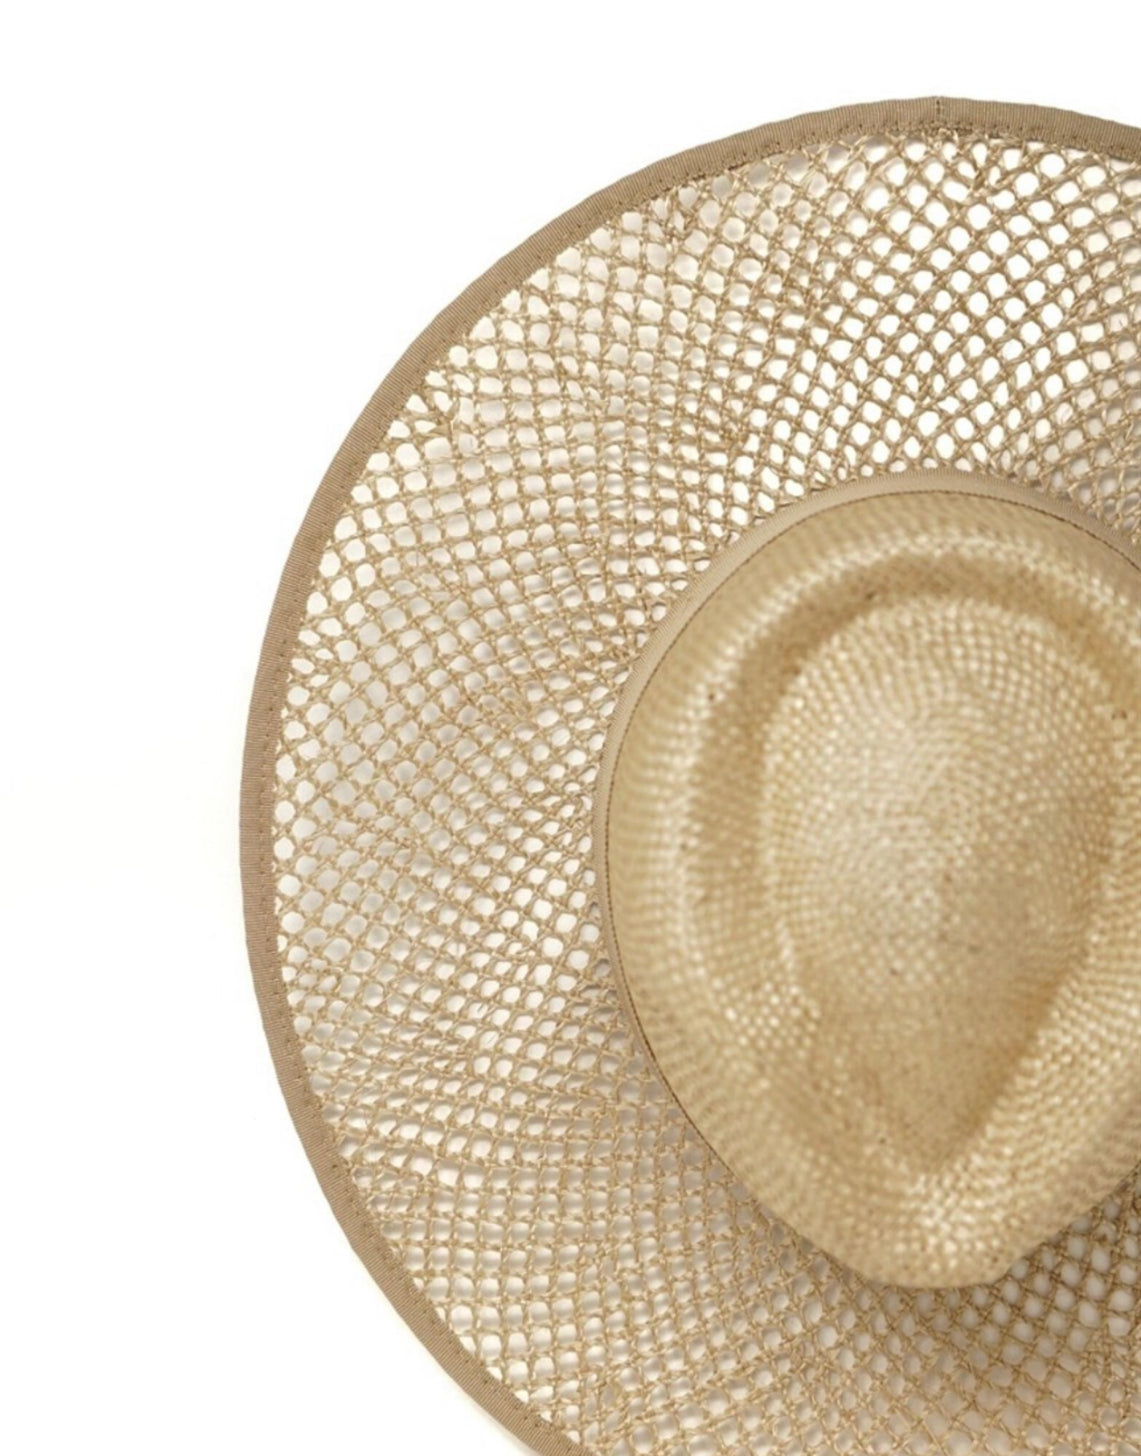 stylish straw hat choice for leisure